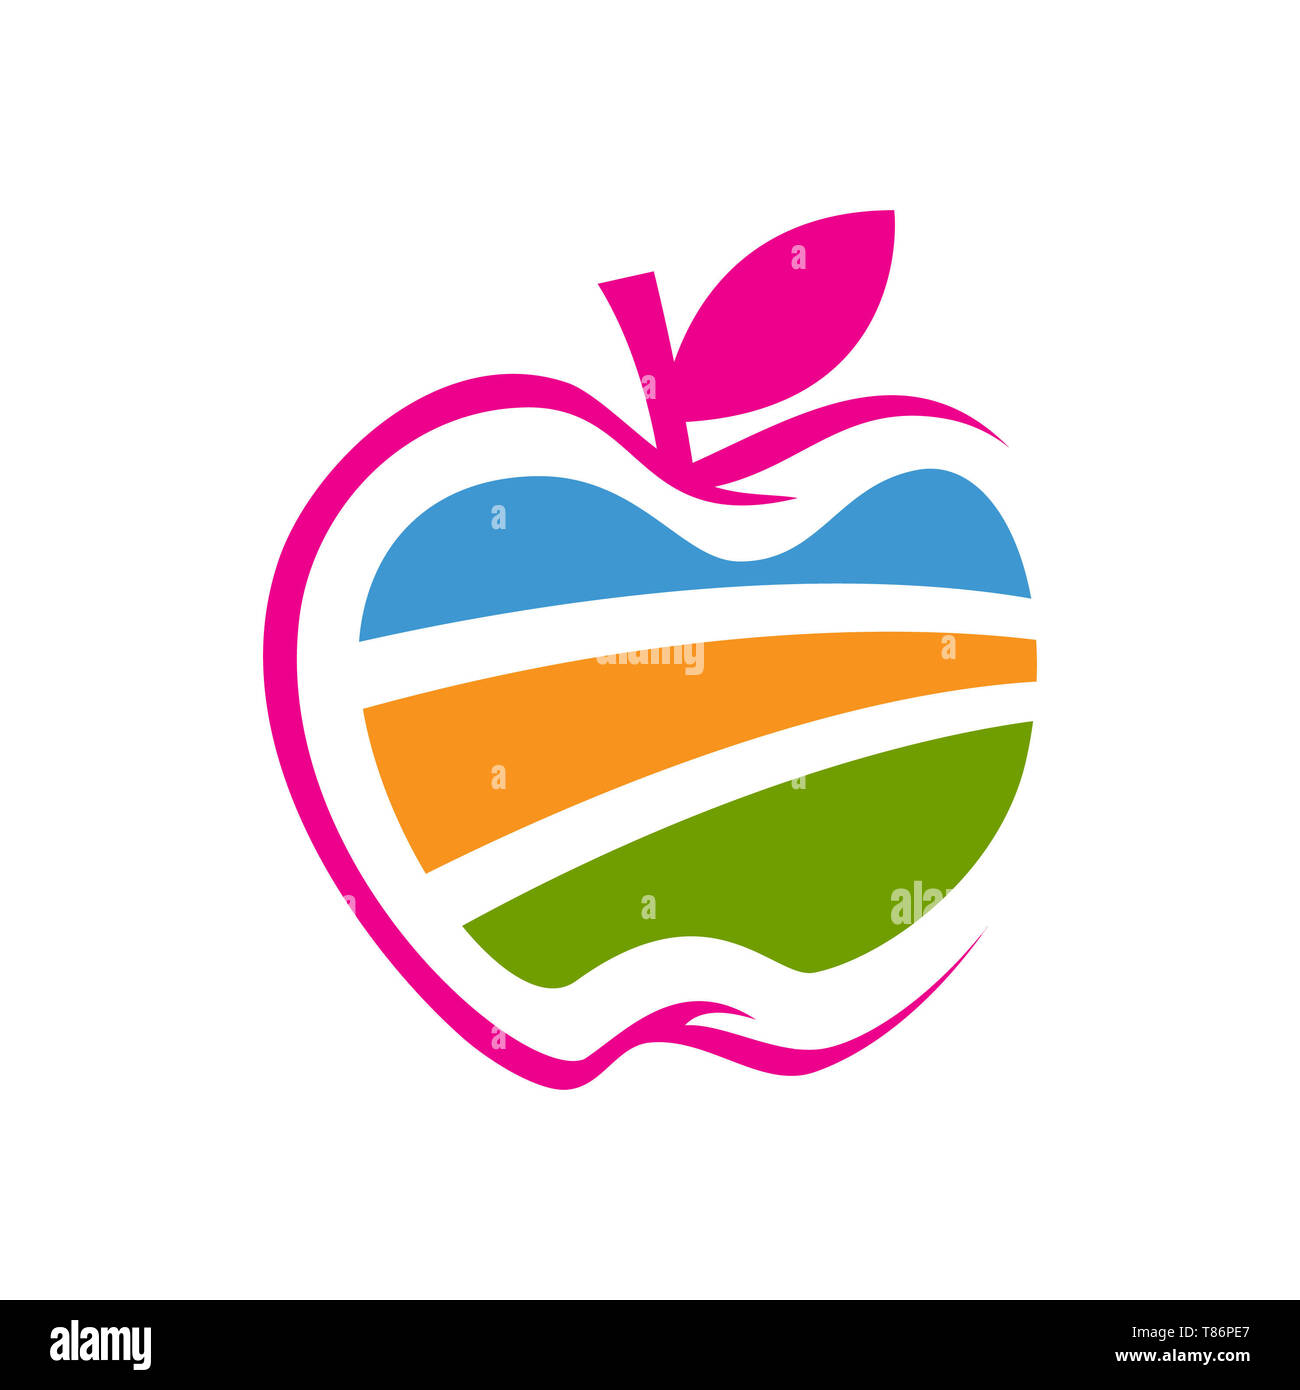 Abstract apple logo vector design illustrations. Nature graphic Apple icon isolated on white background. Stock Photo